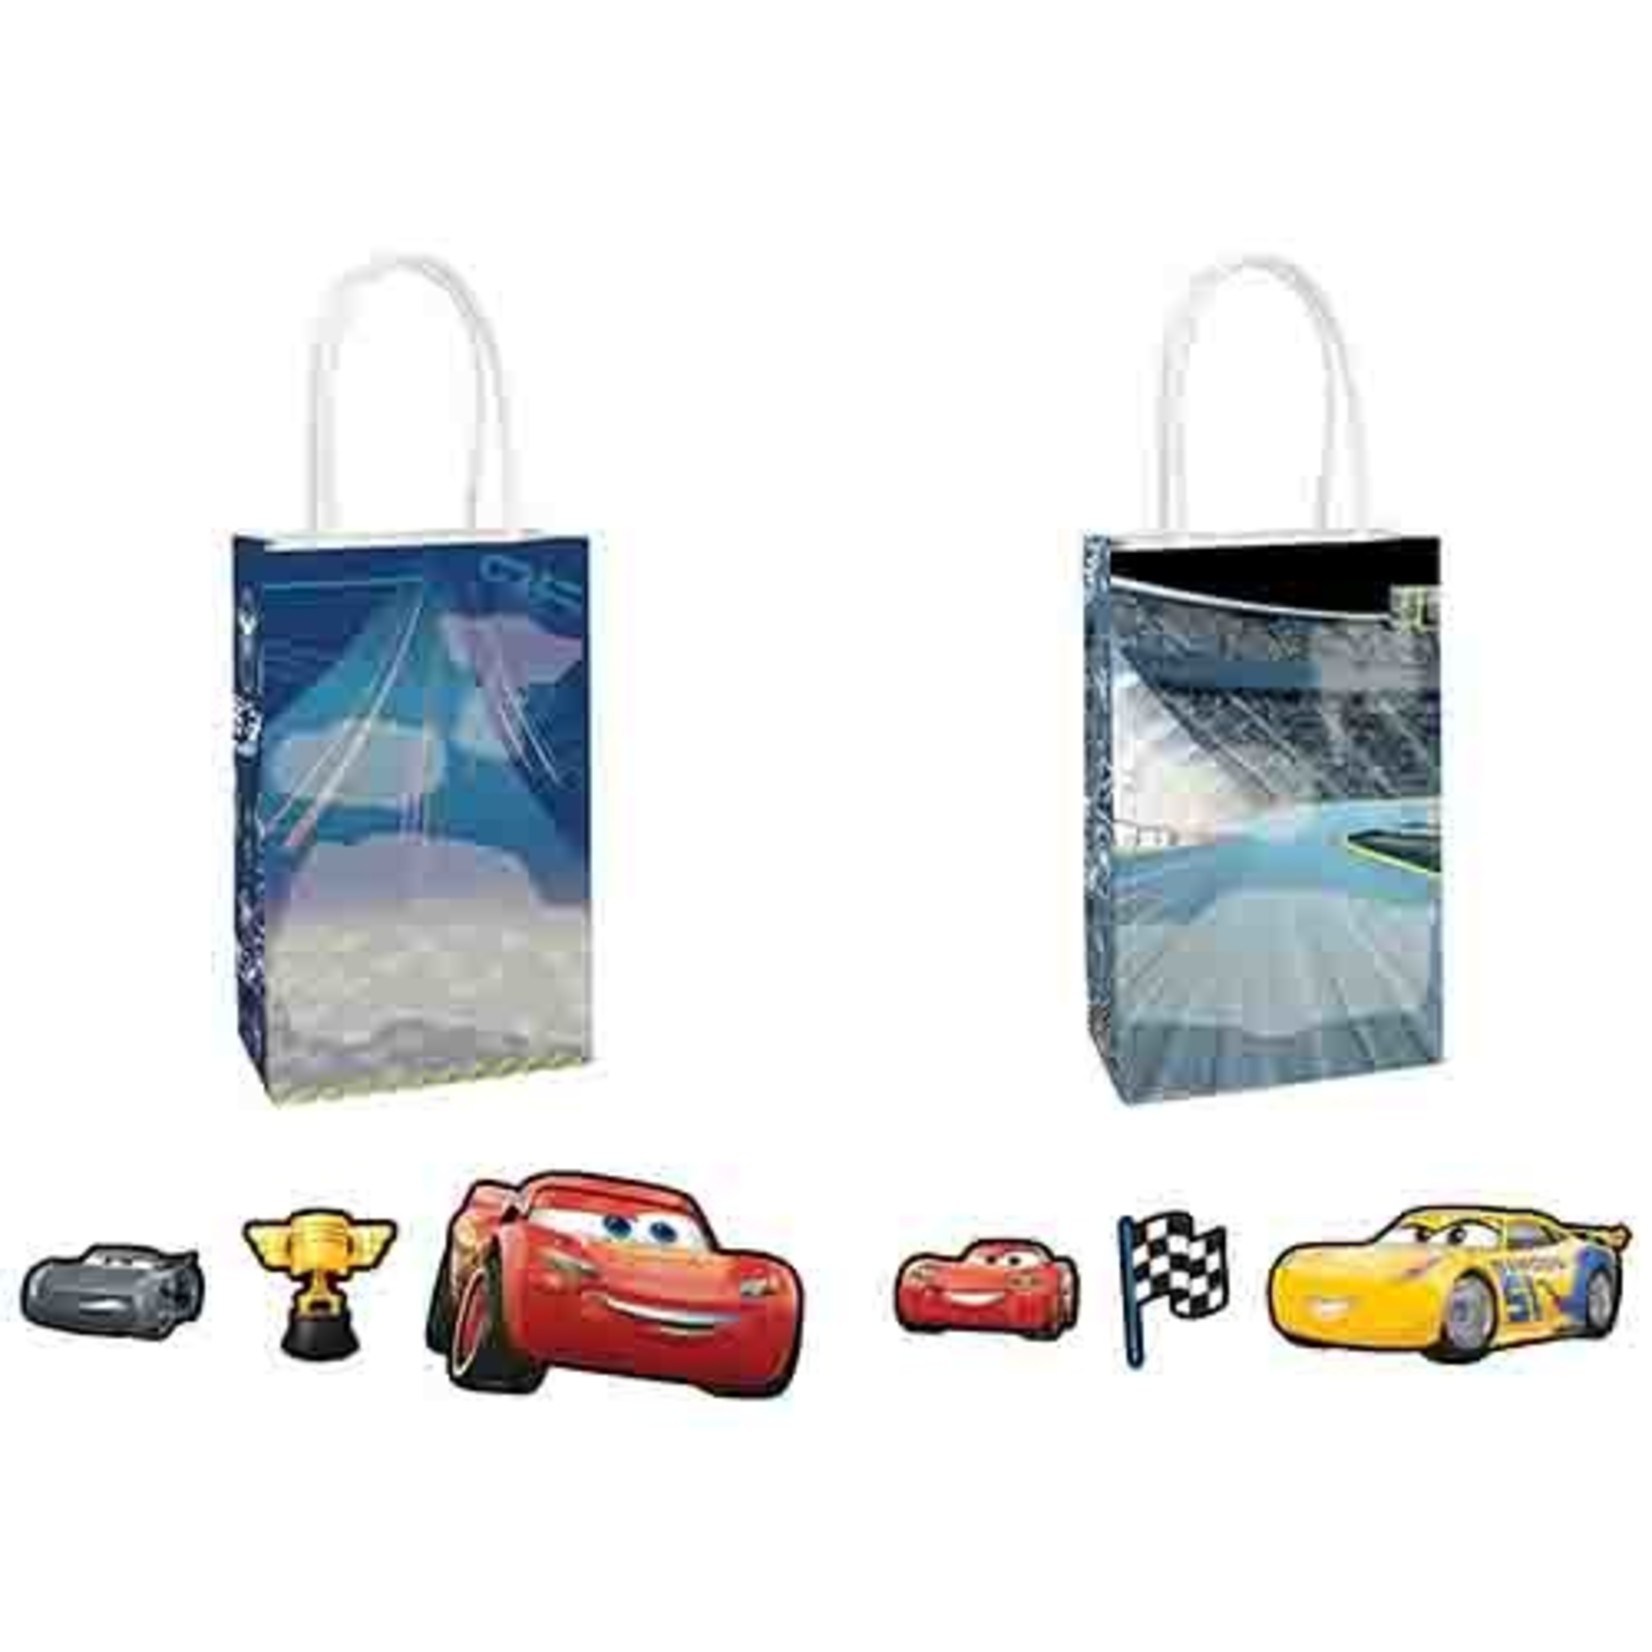 Amscan Disney's Cars 'Create Your Own' Loot Bags - 8ct.